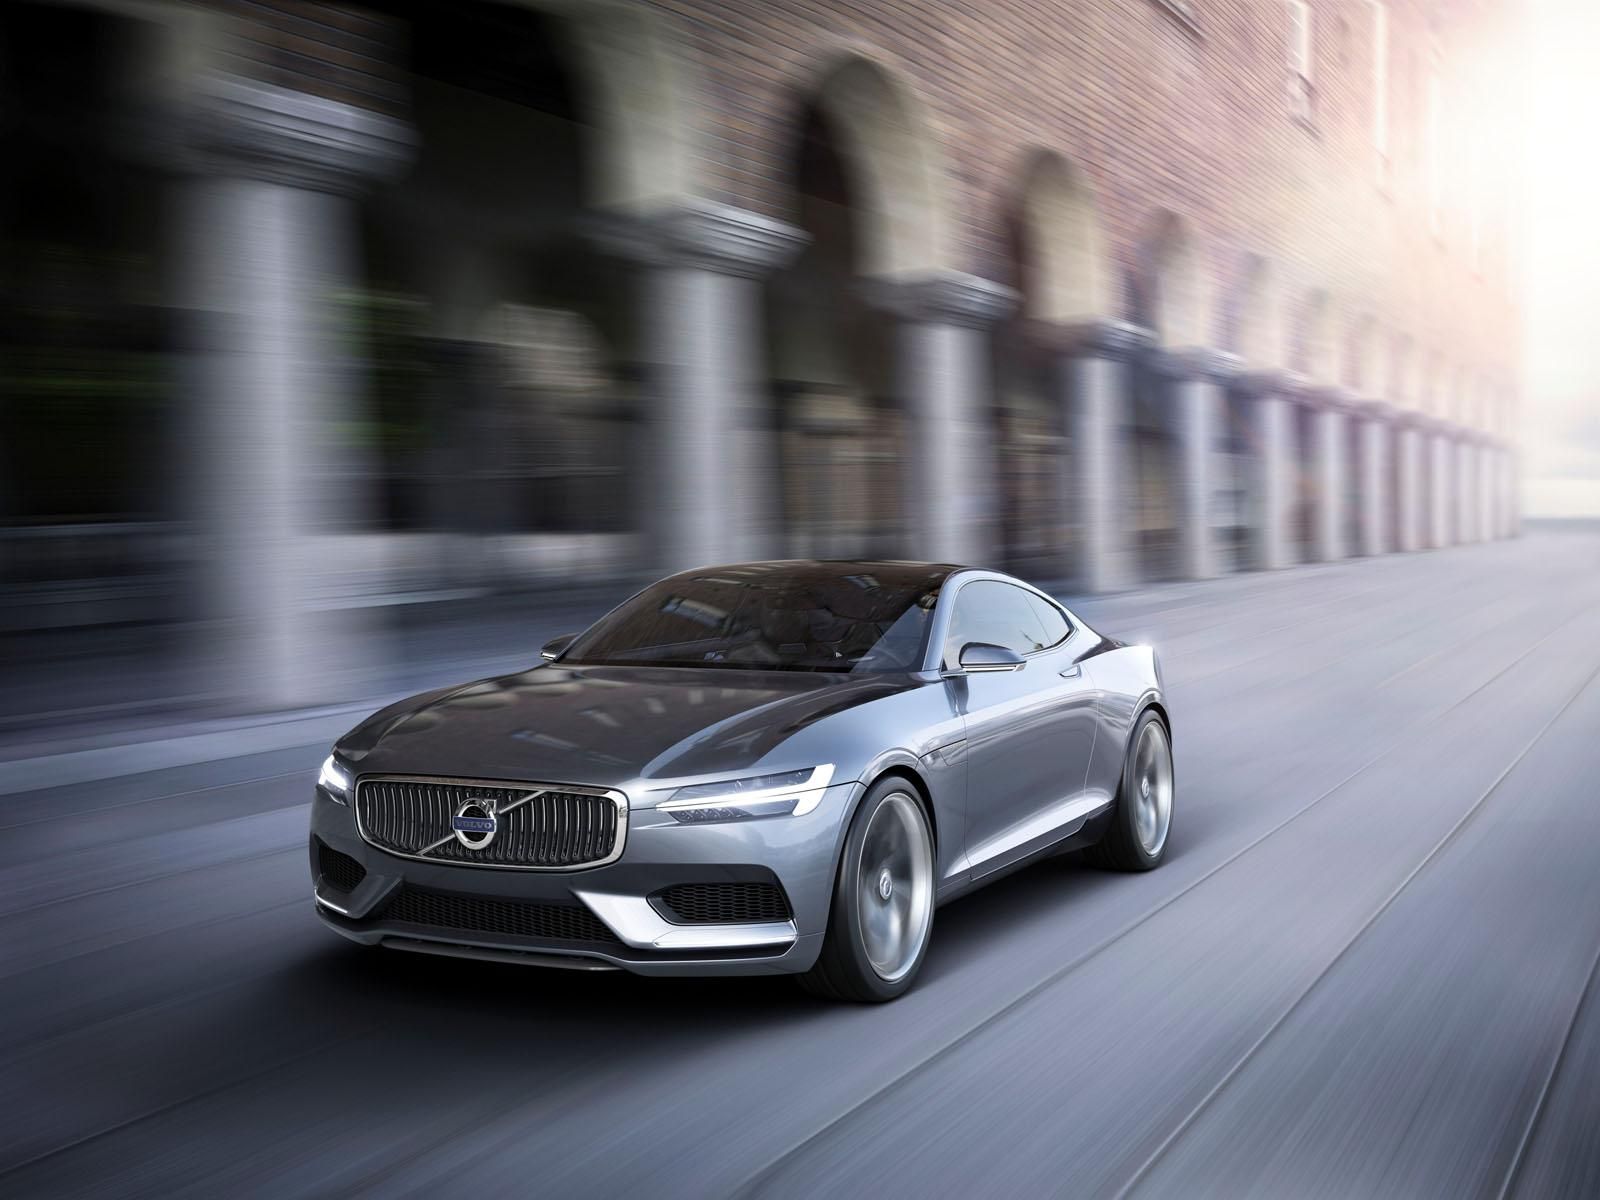 YEN VOLVO CONCEPT COUPE RESM GALERS